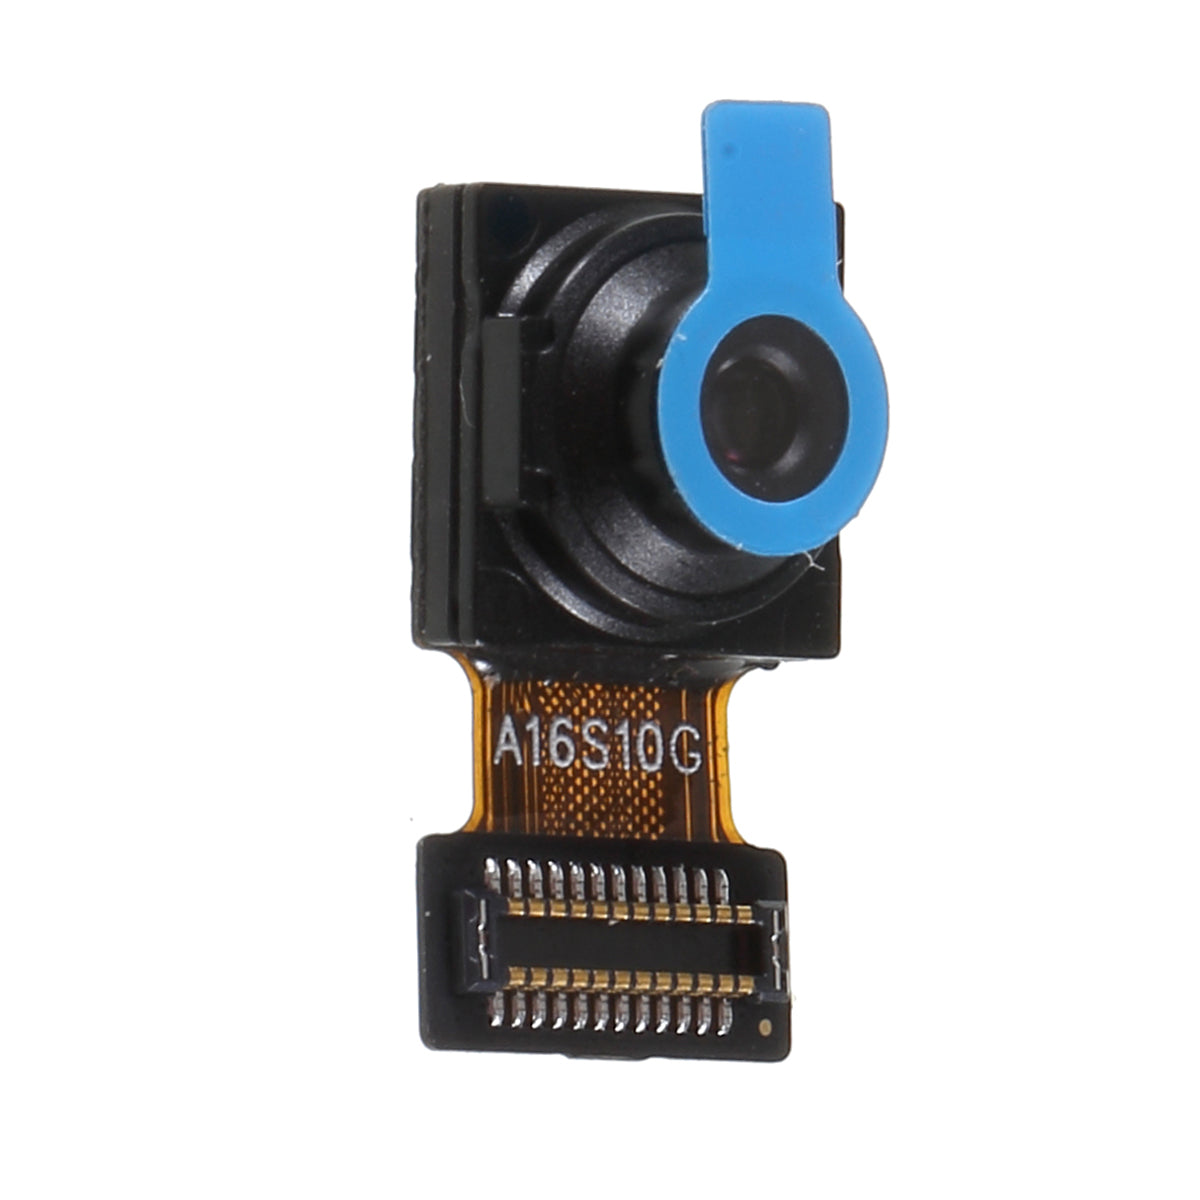 OEM Front Facing Camera Module Part for Huawei Honor 8X/Honor 9i/Honor 9 Lite